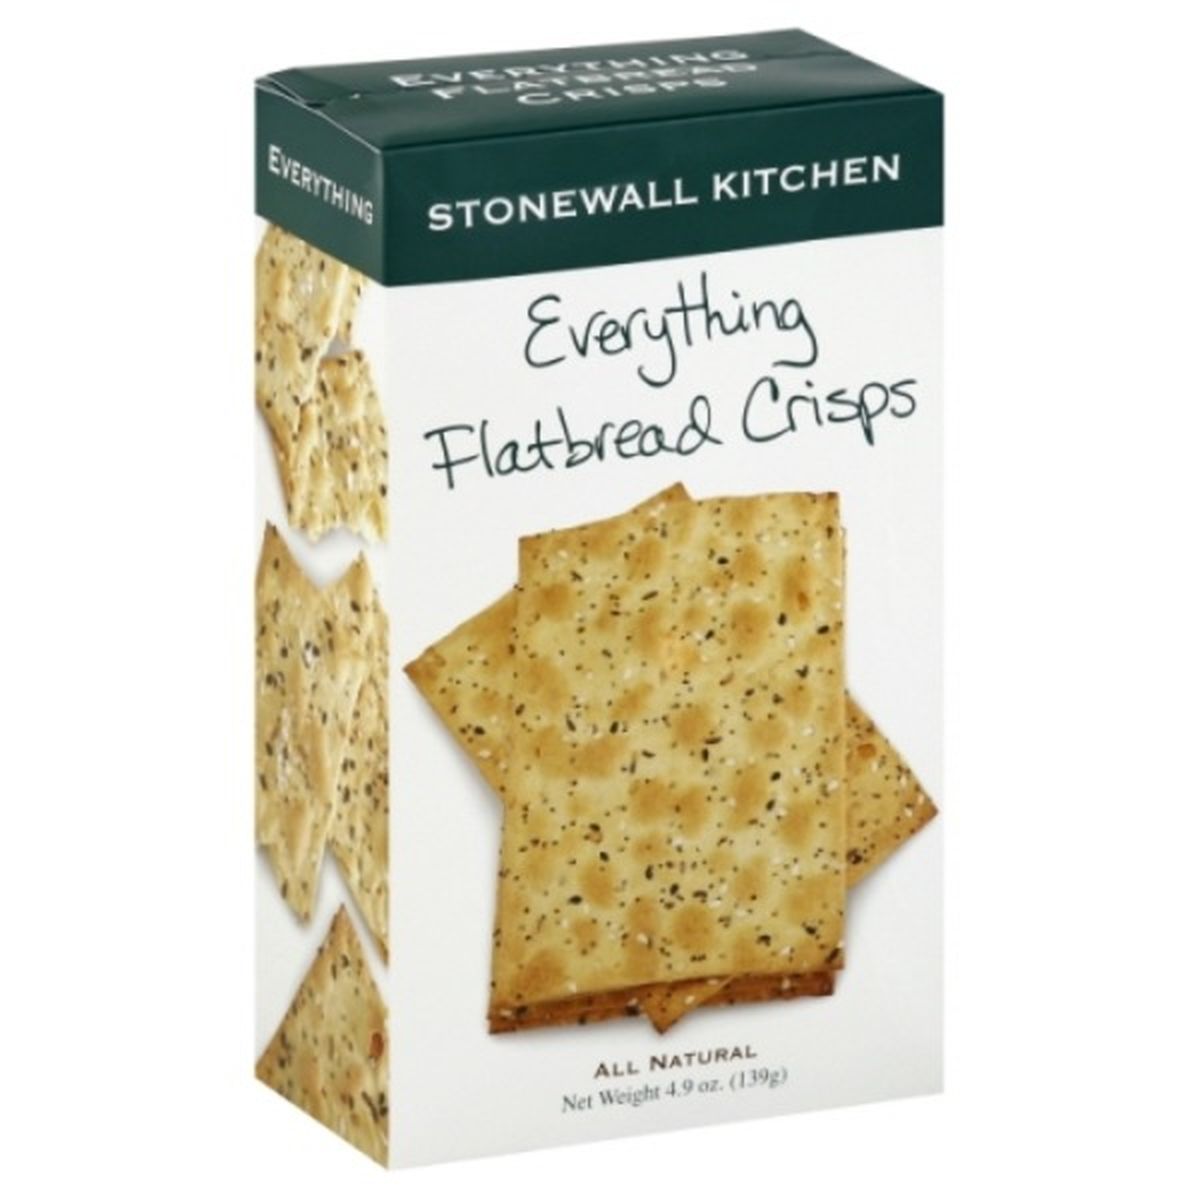 Calories in Stonewall Kitchen Flatbread Crisps, Everything